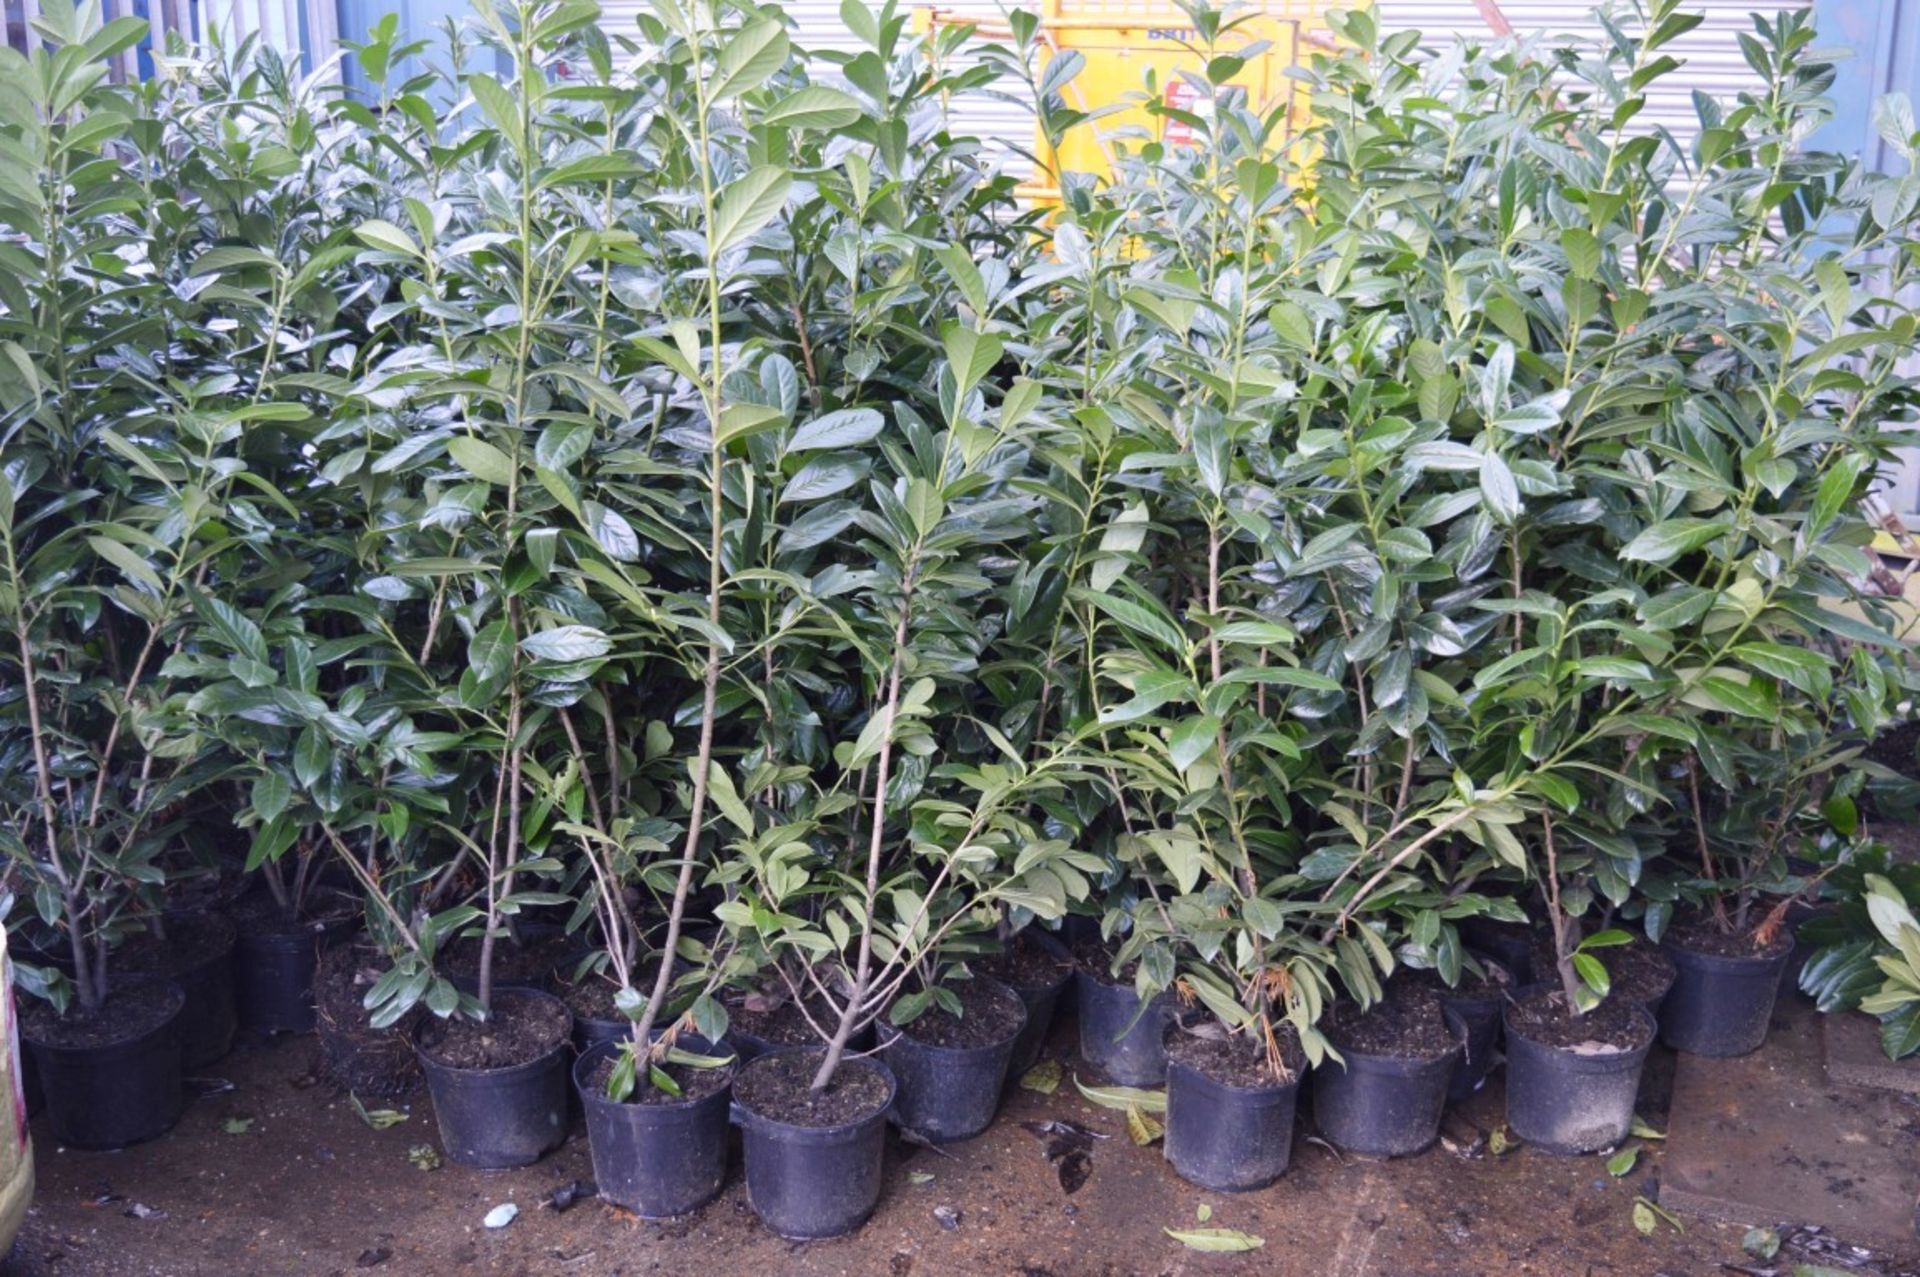 5 x Laurel Potted Garden Plants - Approx 4 to 5 Feet Tall - CL057 - Location: Welwyn, Hertfordshire,